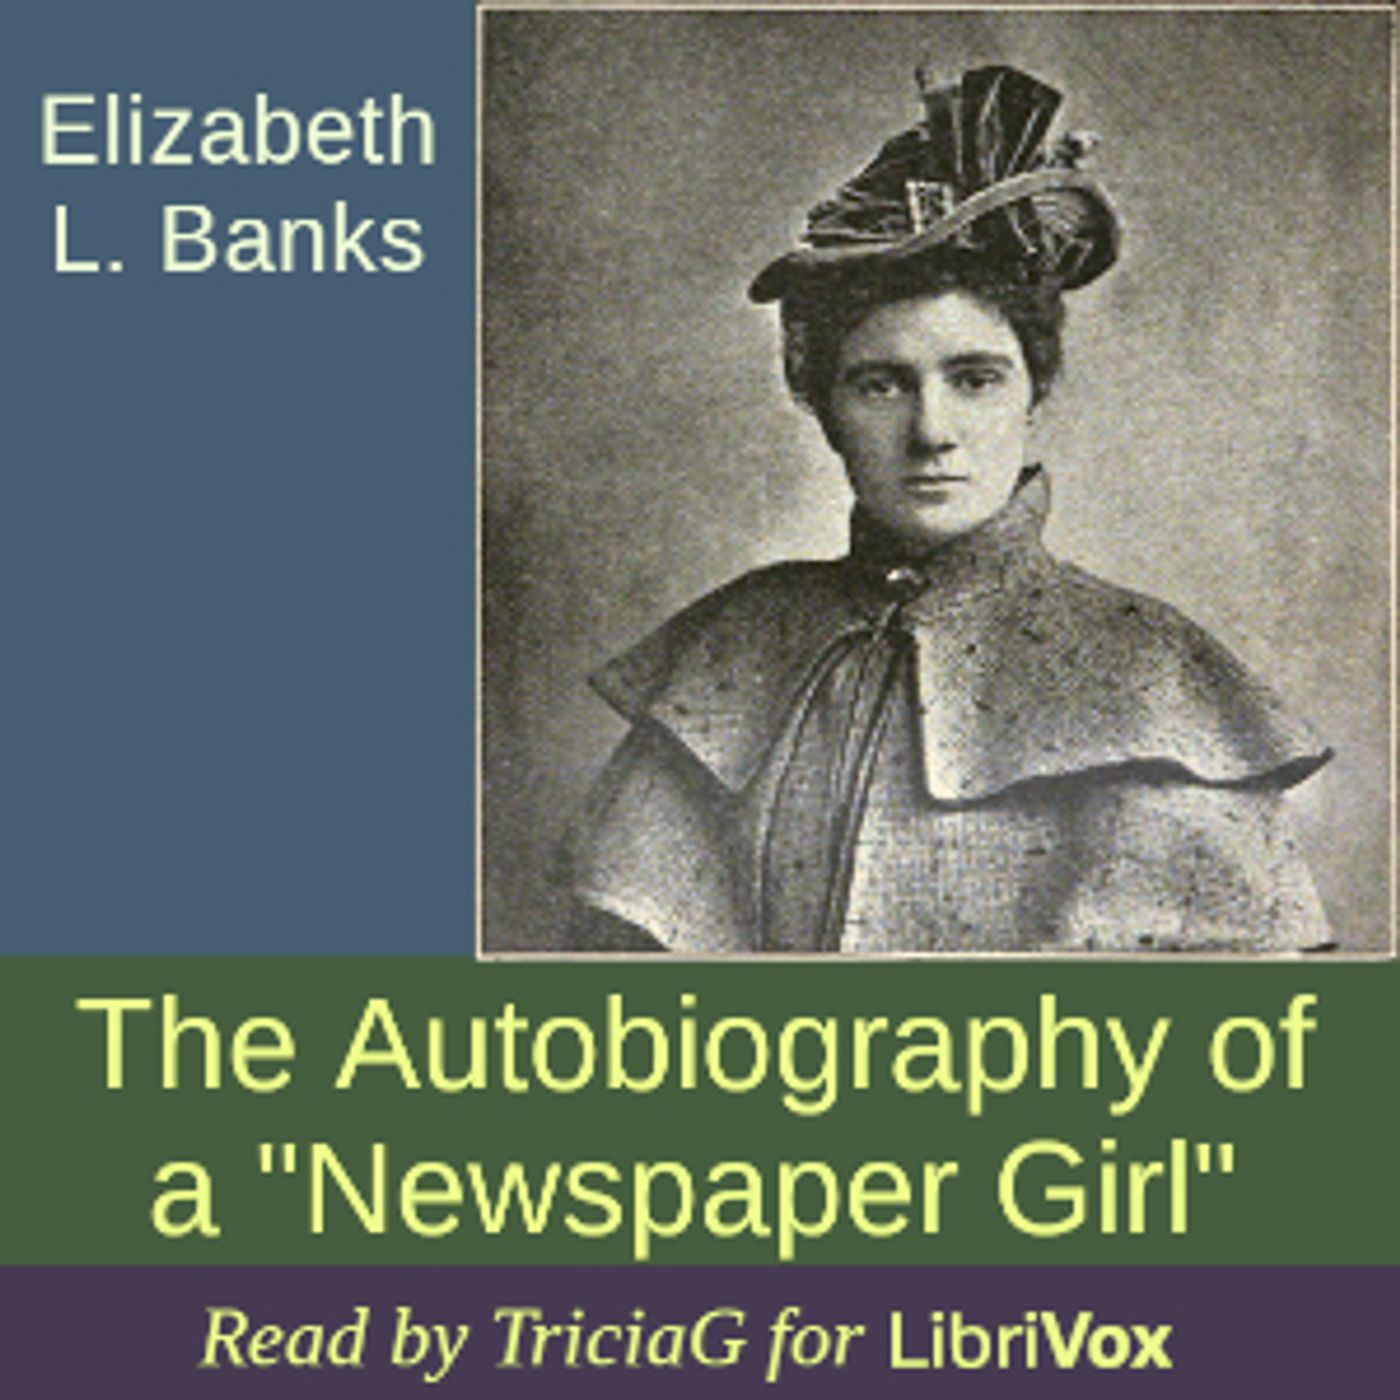 The Autobiography of a “Newspaper Girl”, by Elizabeth L. Banks (1865 – 1938)